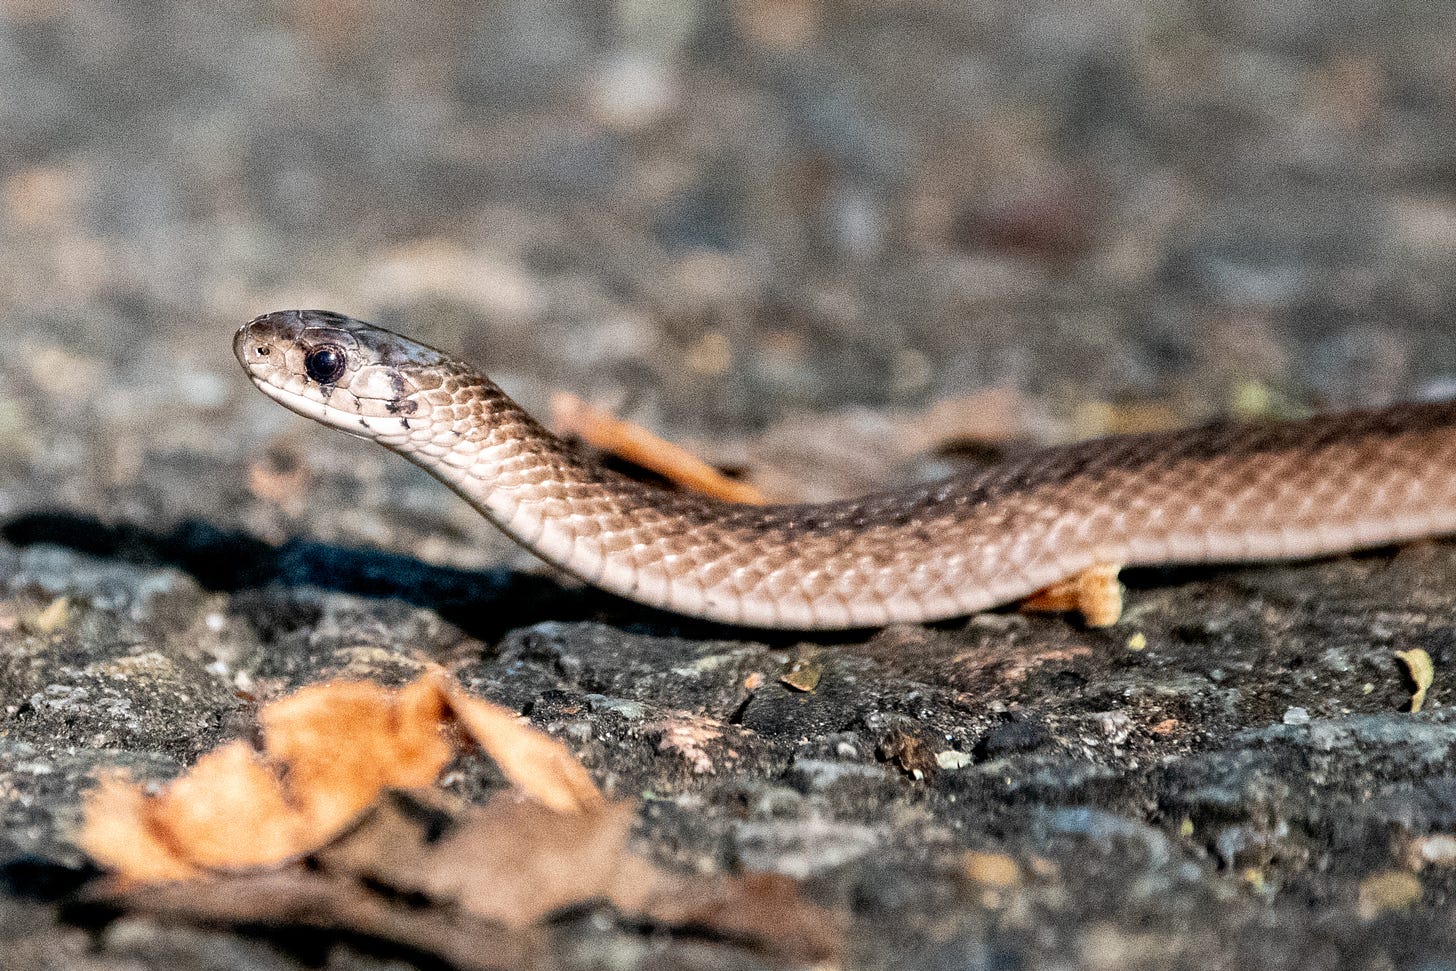 The compact head and about eight inches of neck of a common garter snake with hazel eyes, slithering across an asphalt path